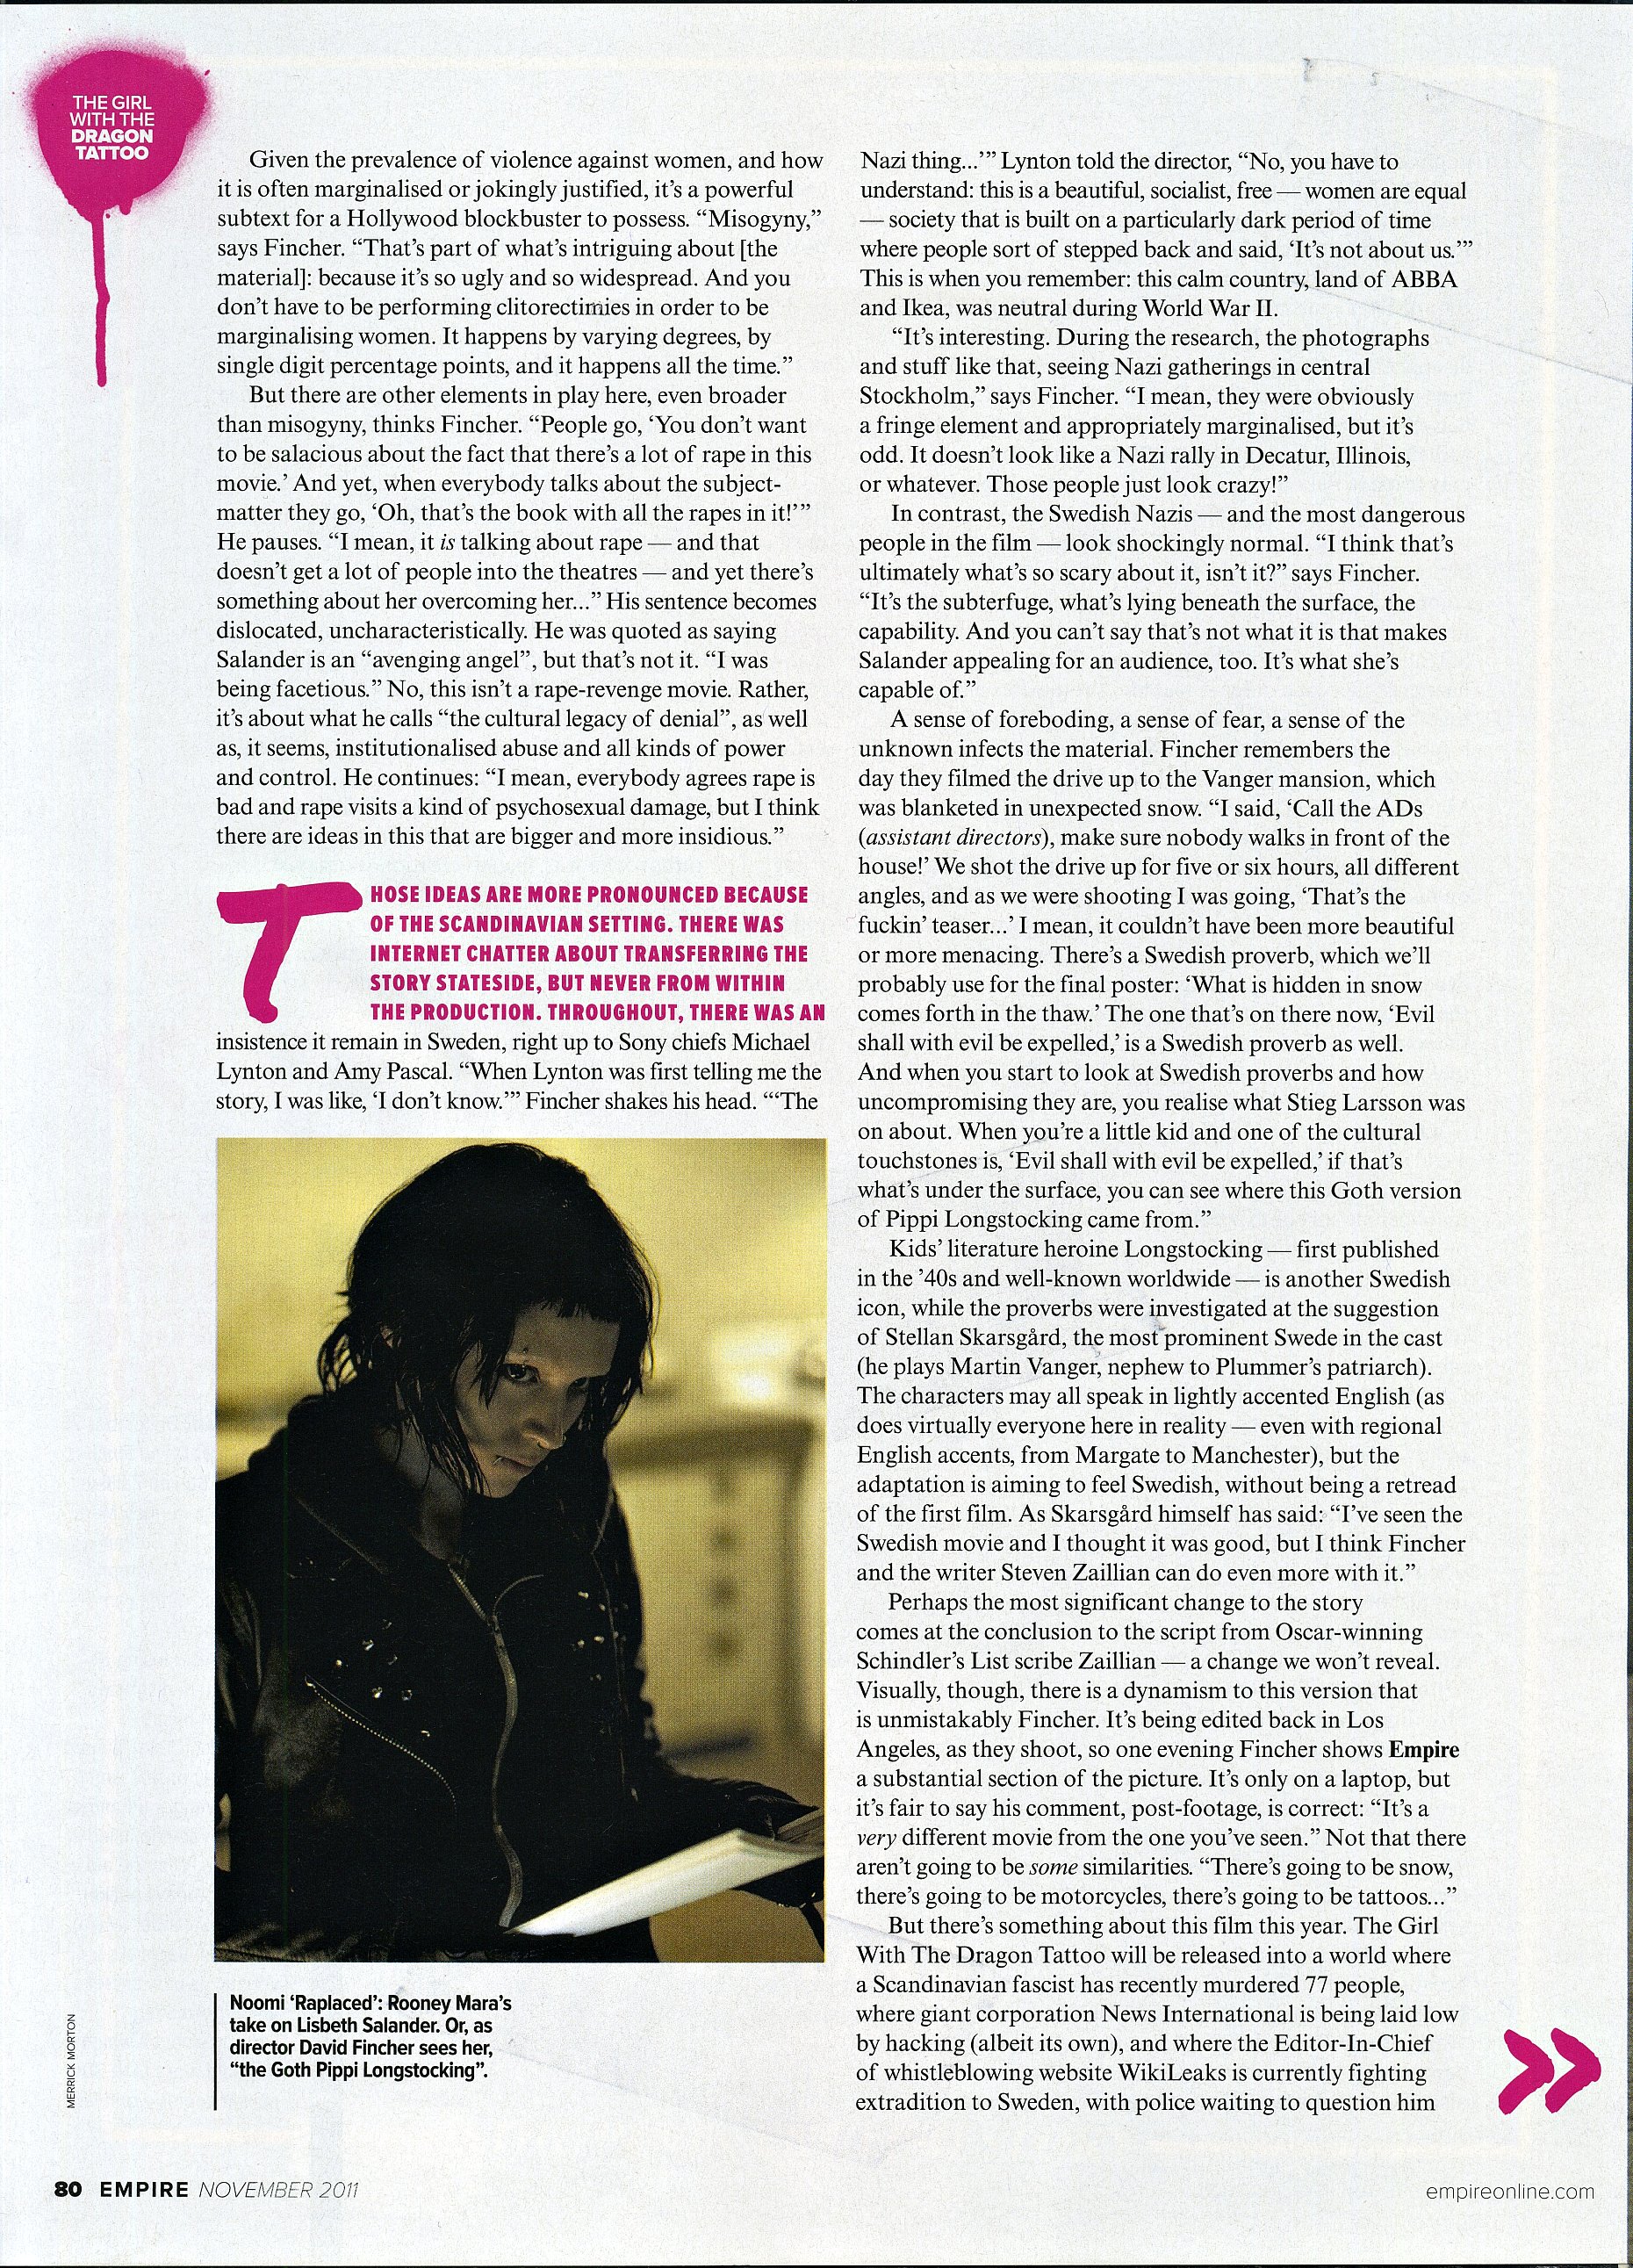 The Girl with the Dragon Tattoo Empire Magazine November 2011 Article, 04